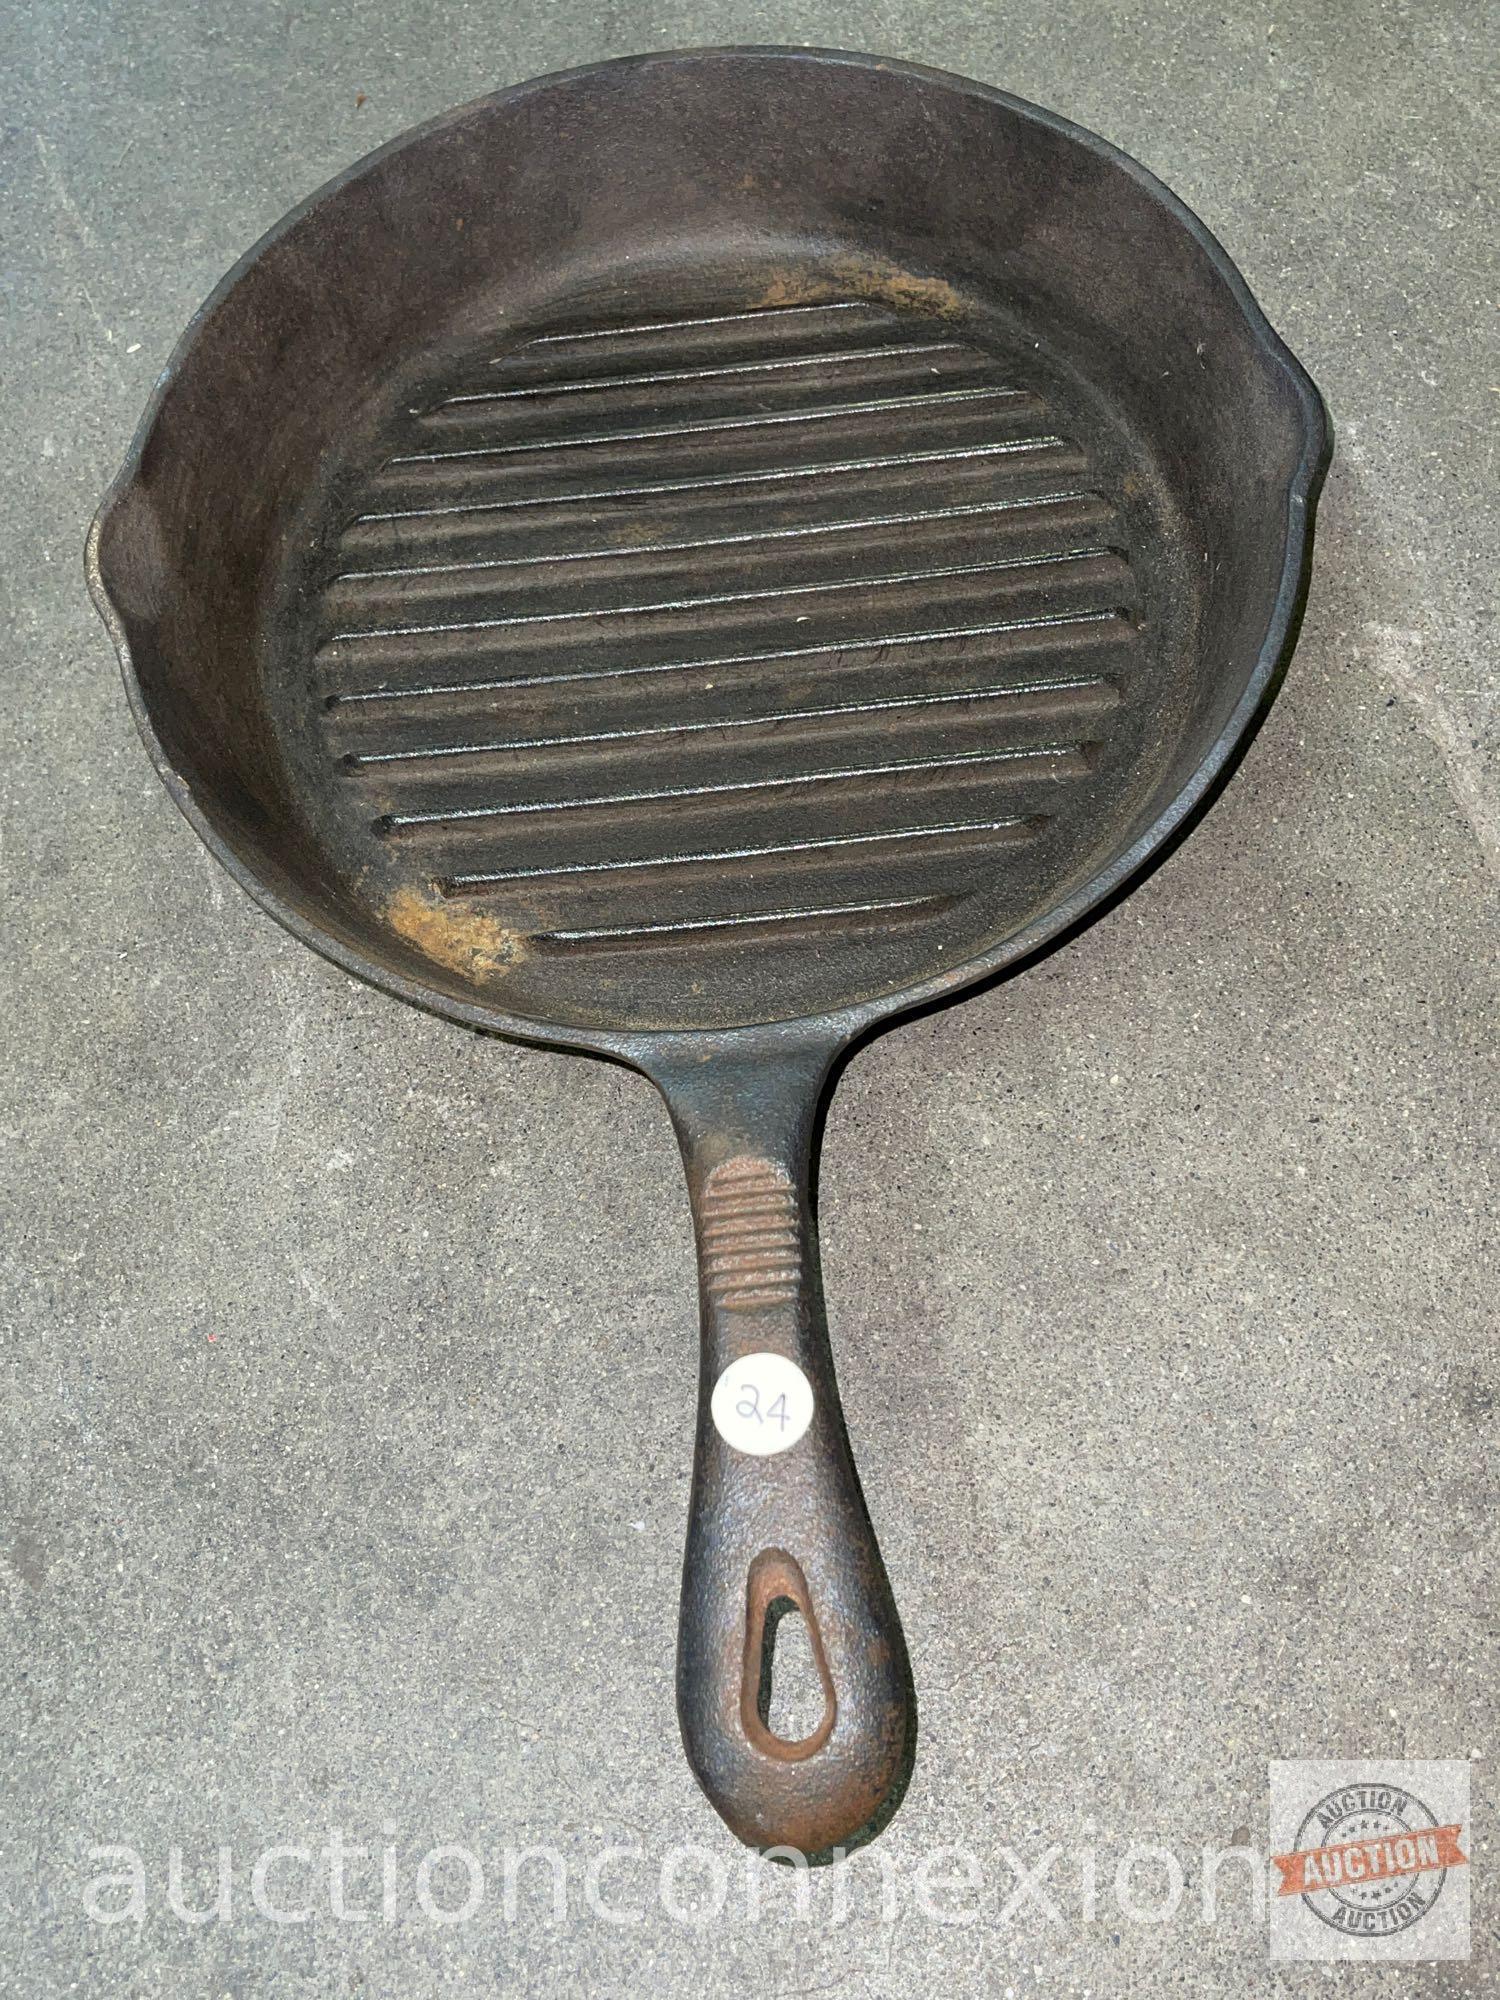 Cast iron grilling skillet, Mse 8"